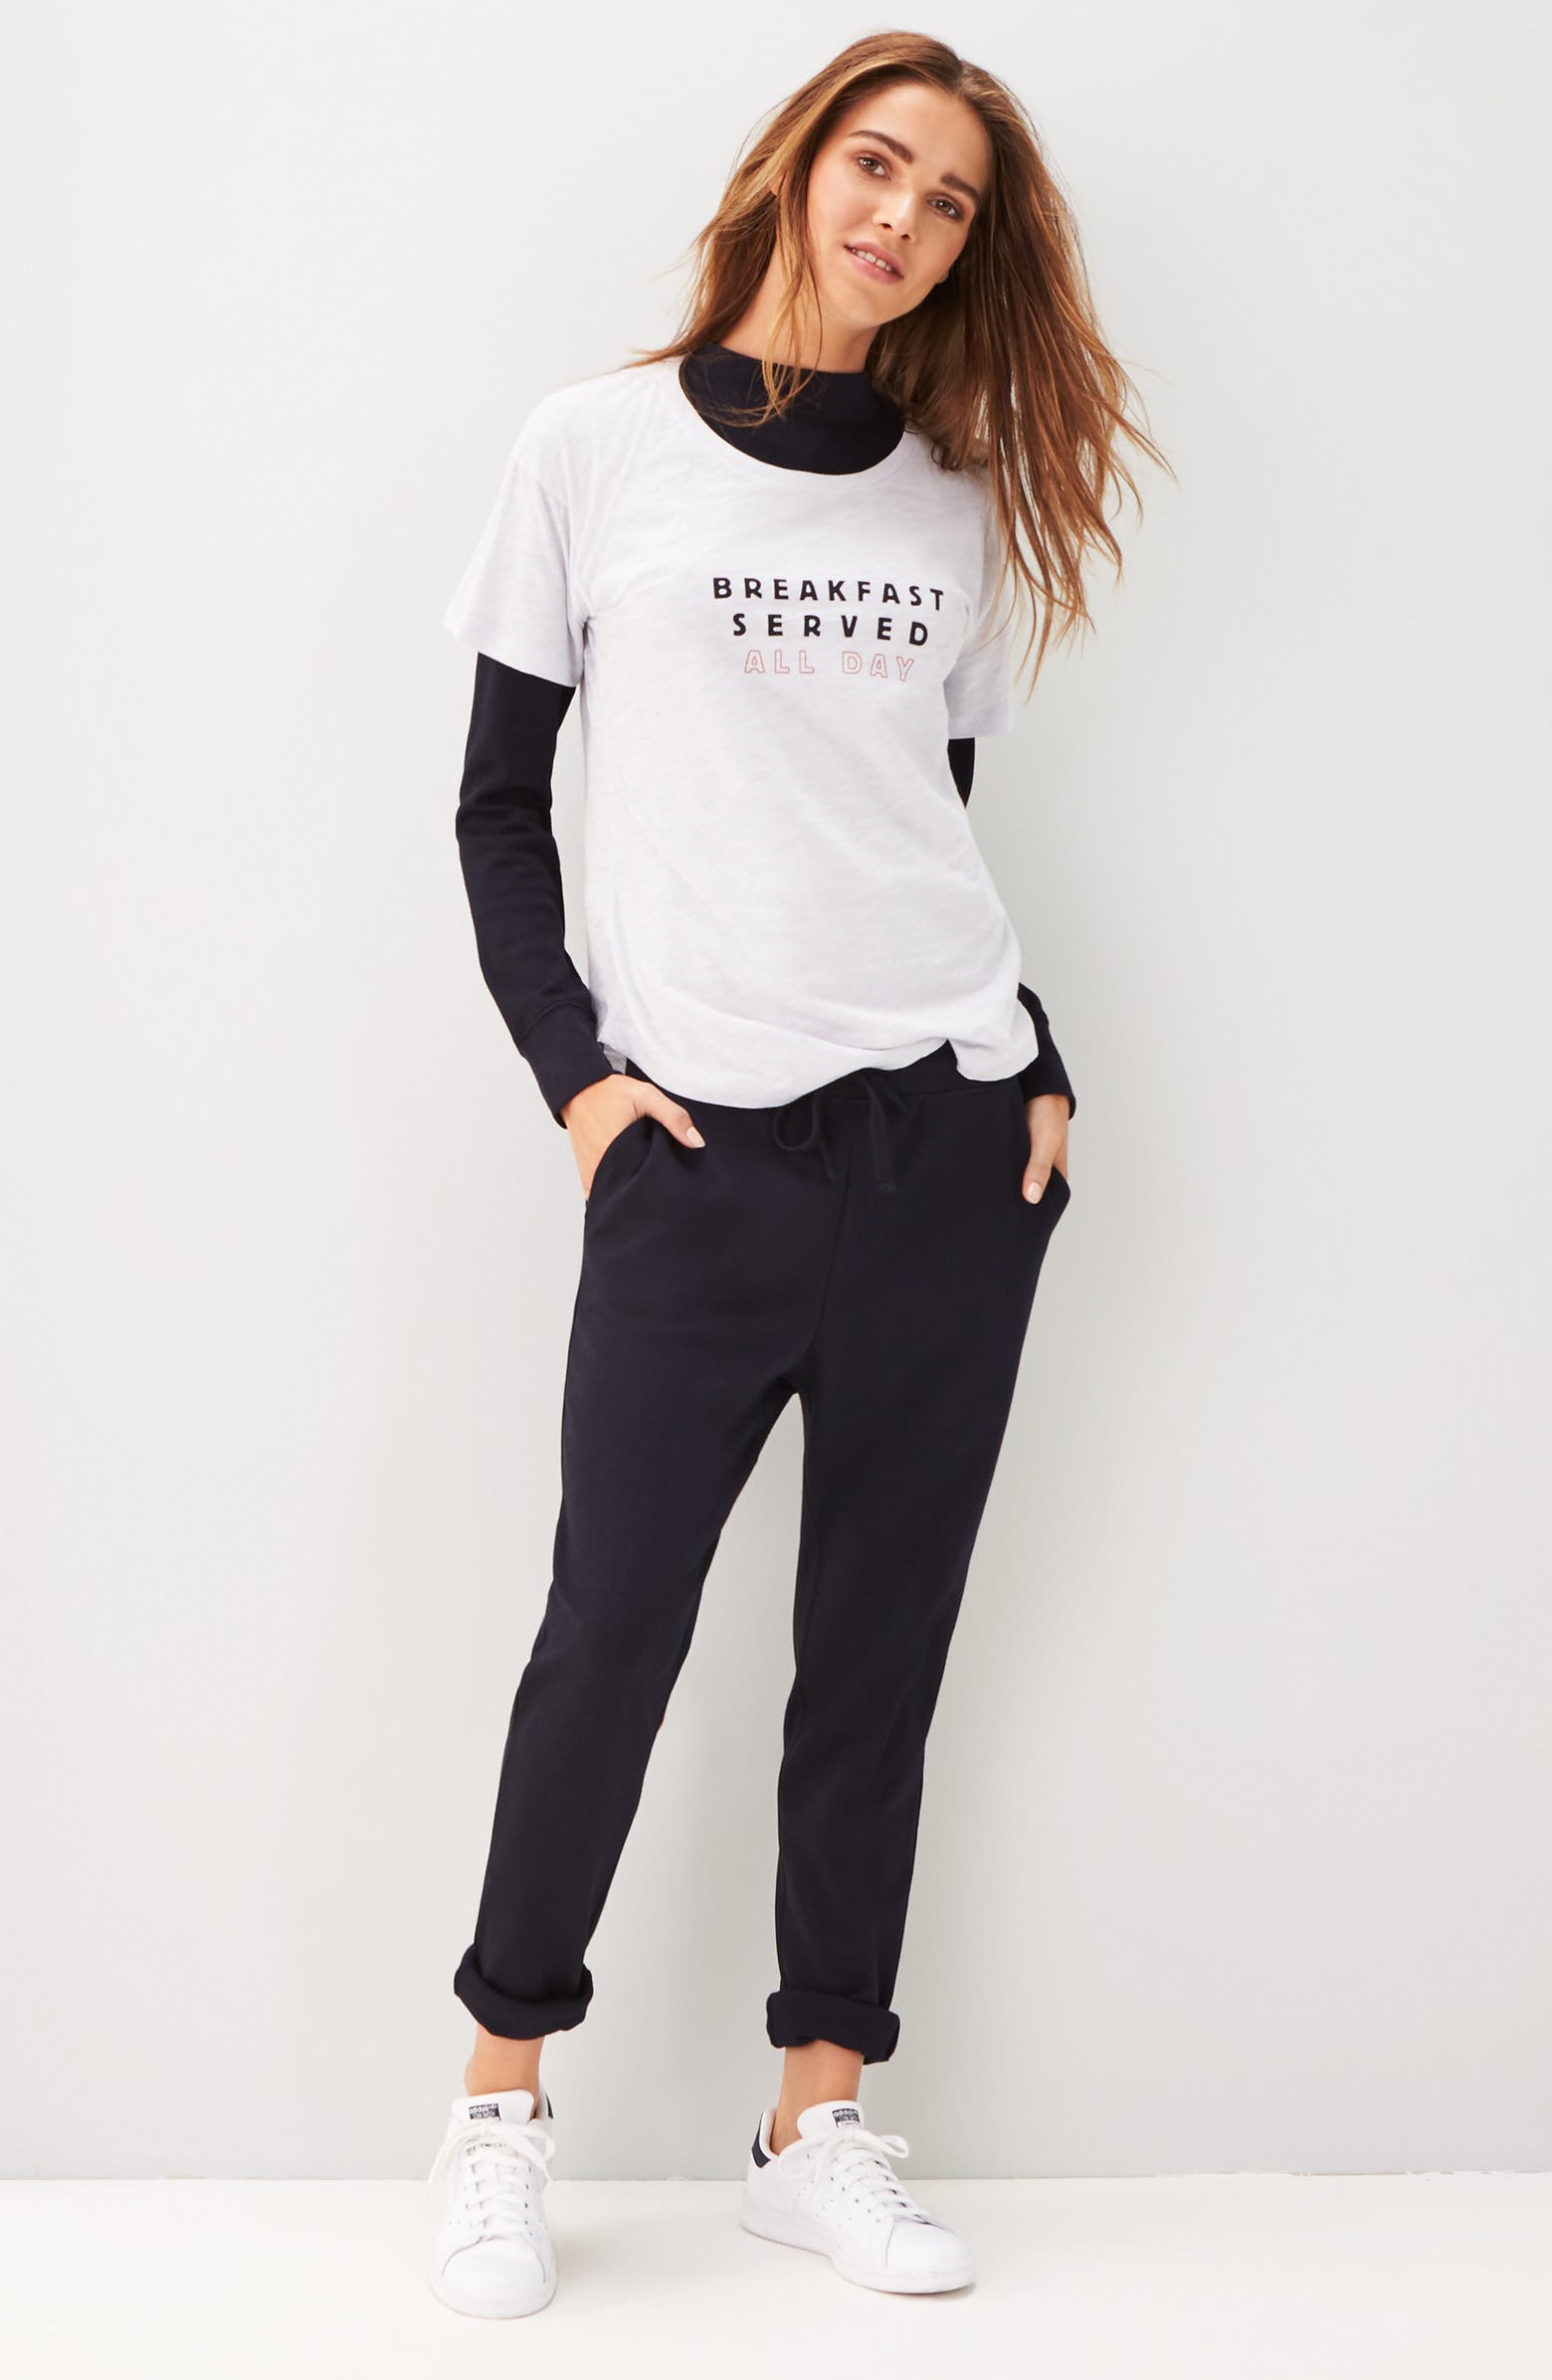 Madewell Anya Breakfast Served All Day Tee Nordstrom